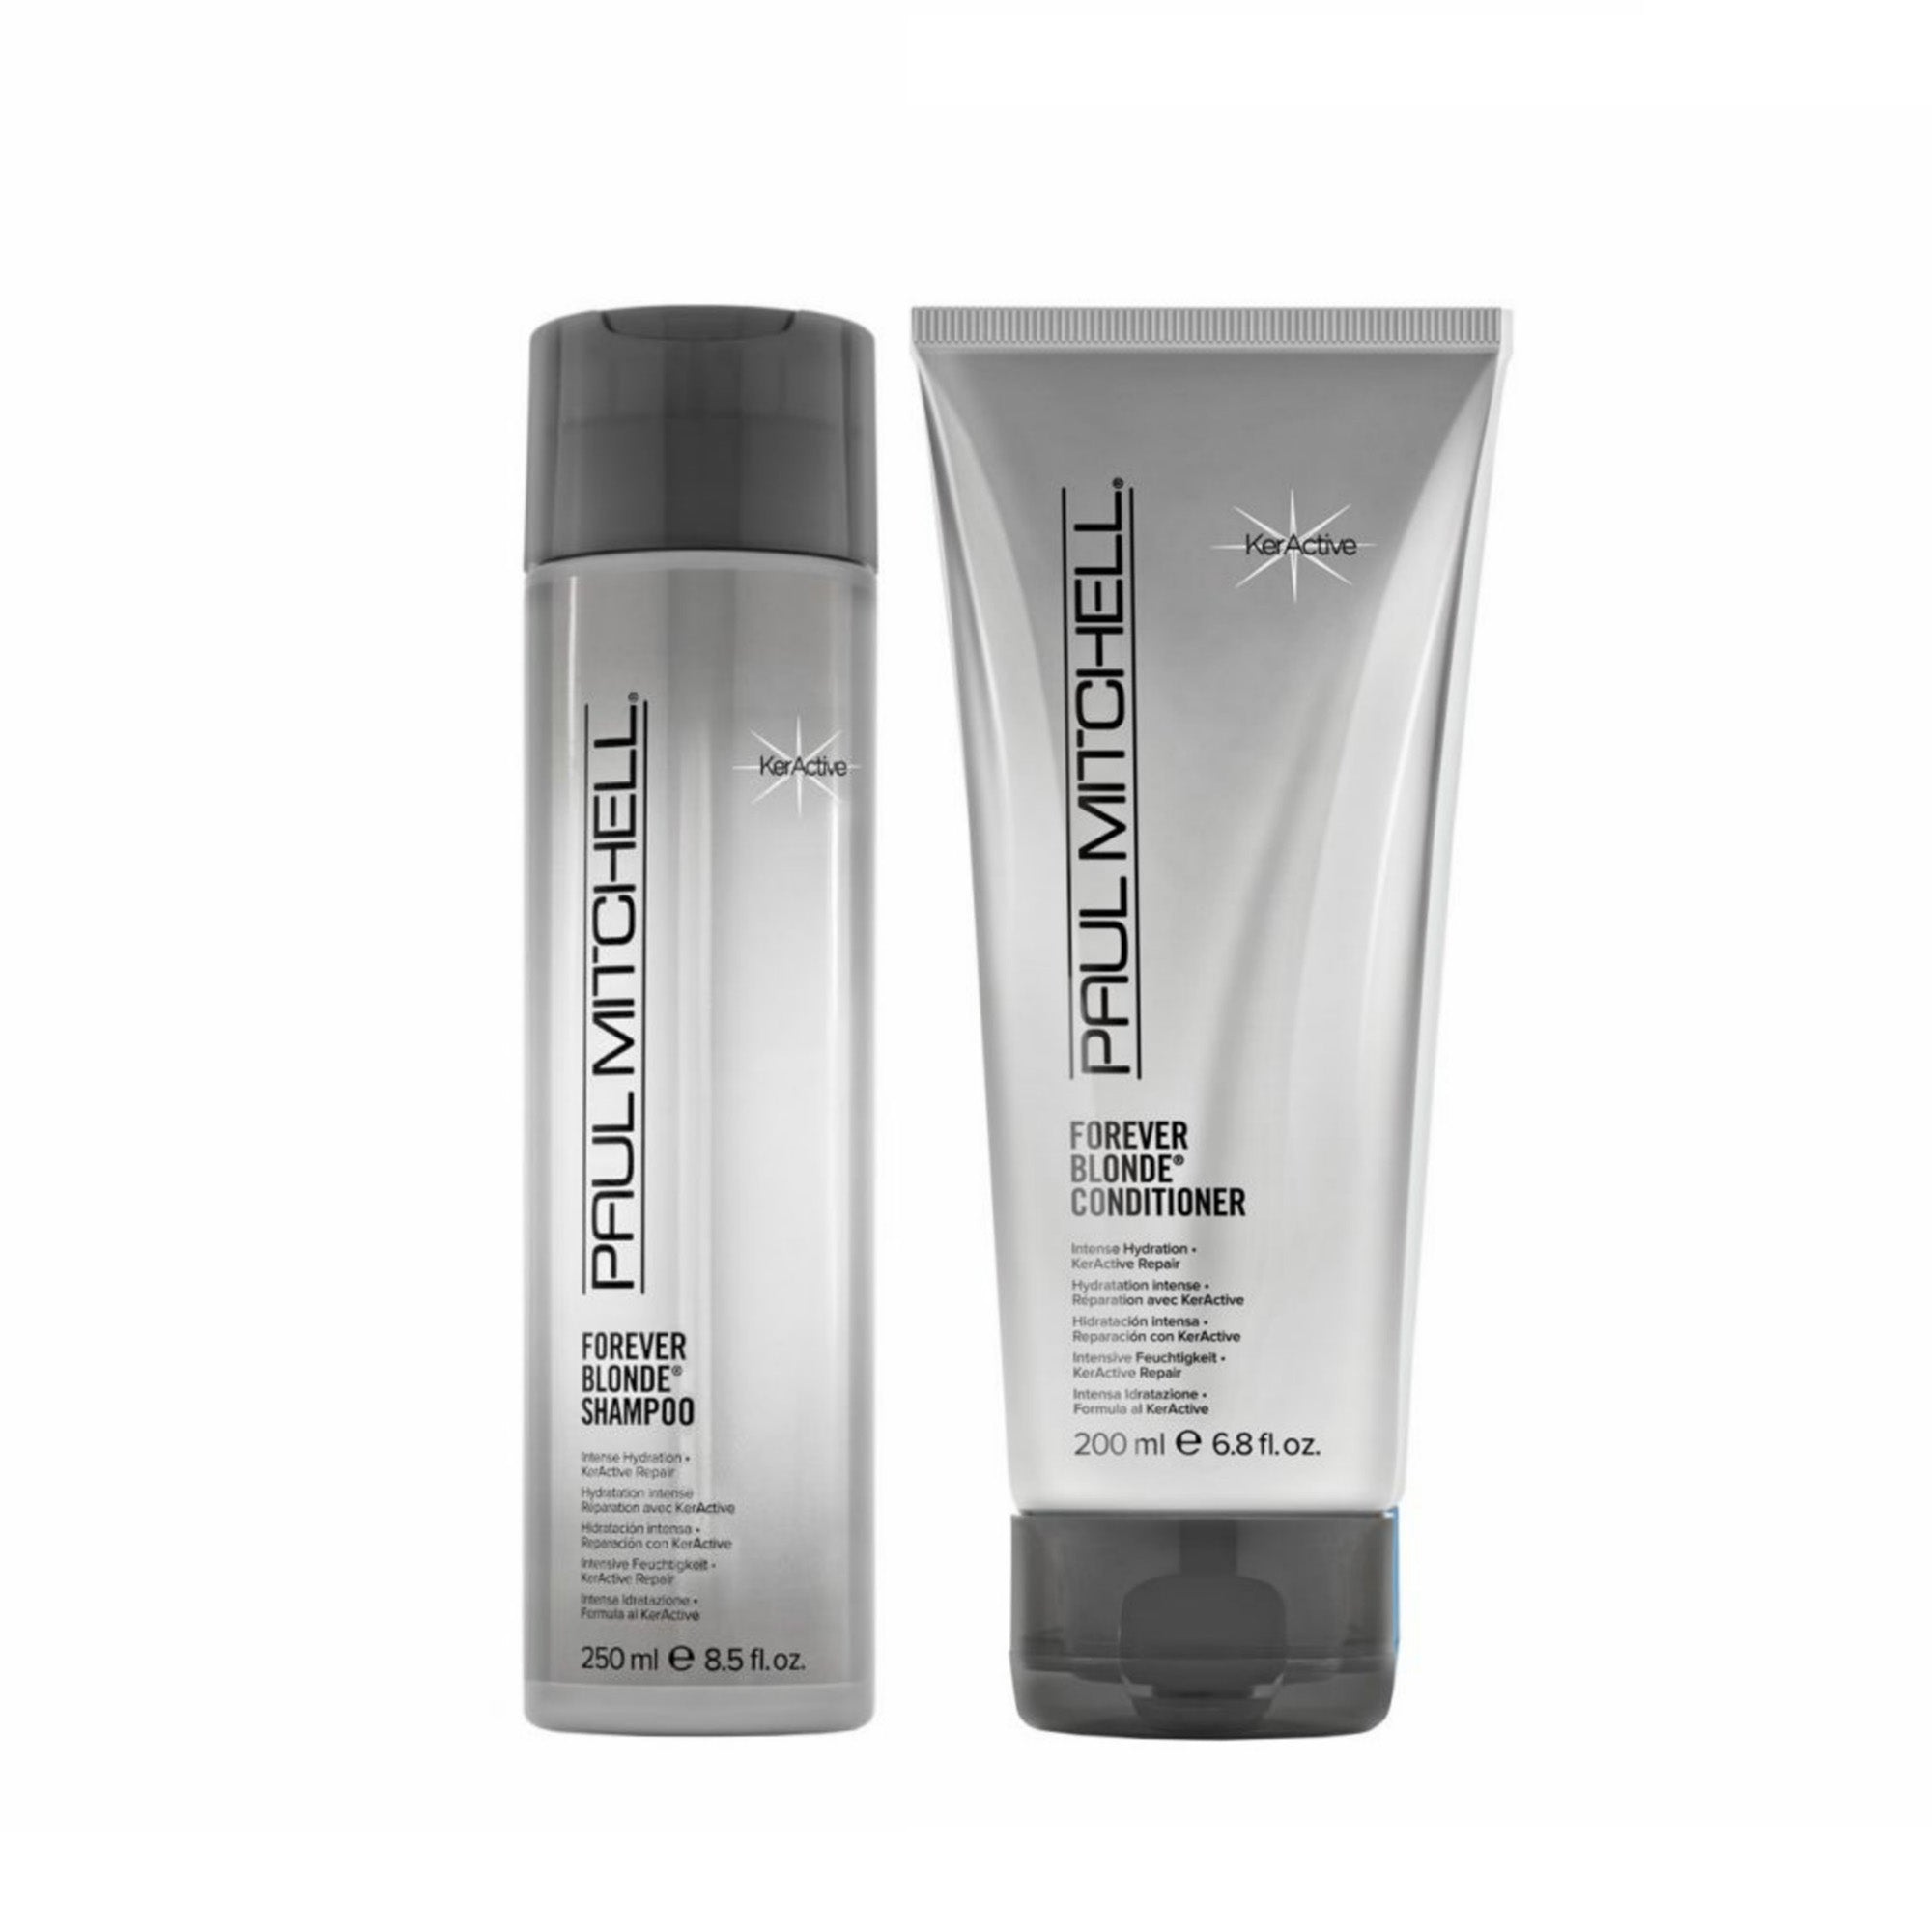 Paul Mitchell Forever Blonde Hair Shampoo 8.5 fl. oz. / 250ml & Conditioner  6.8 fl. oz. / 200ml - Paul Mitchell Hair Products for Smooth Damage Repair